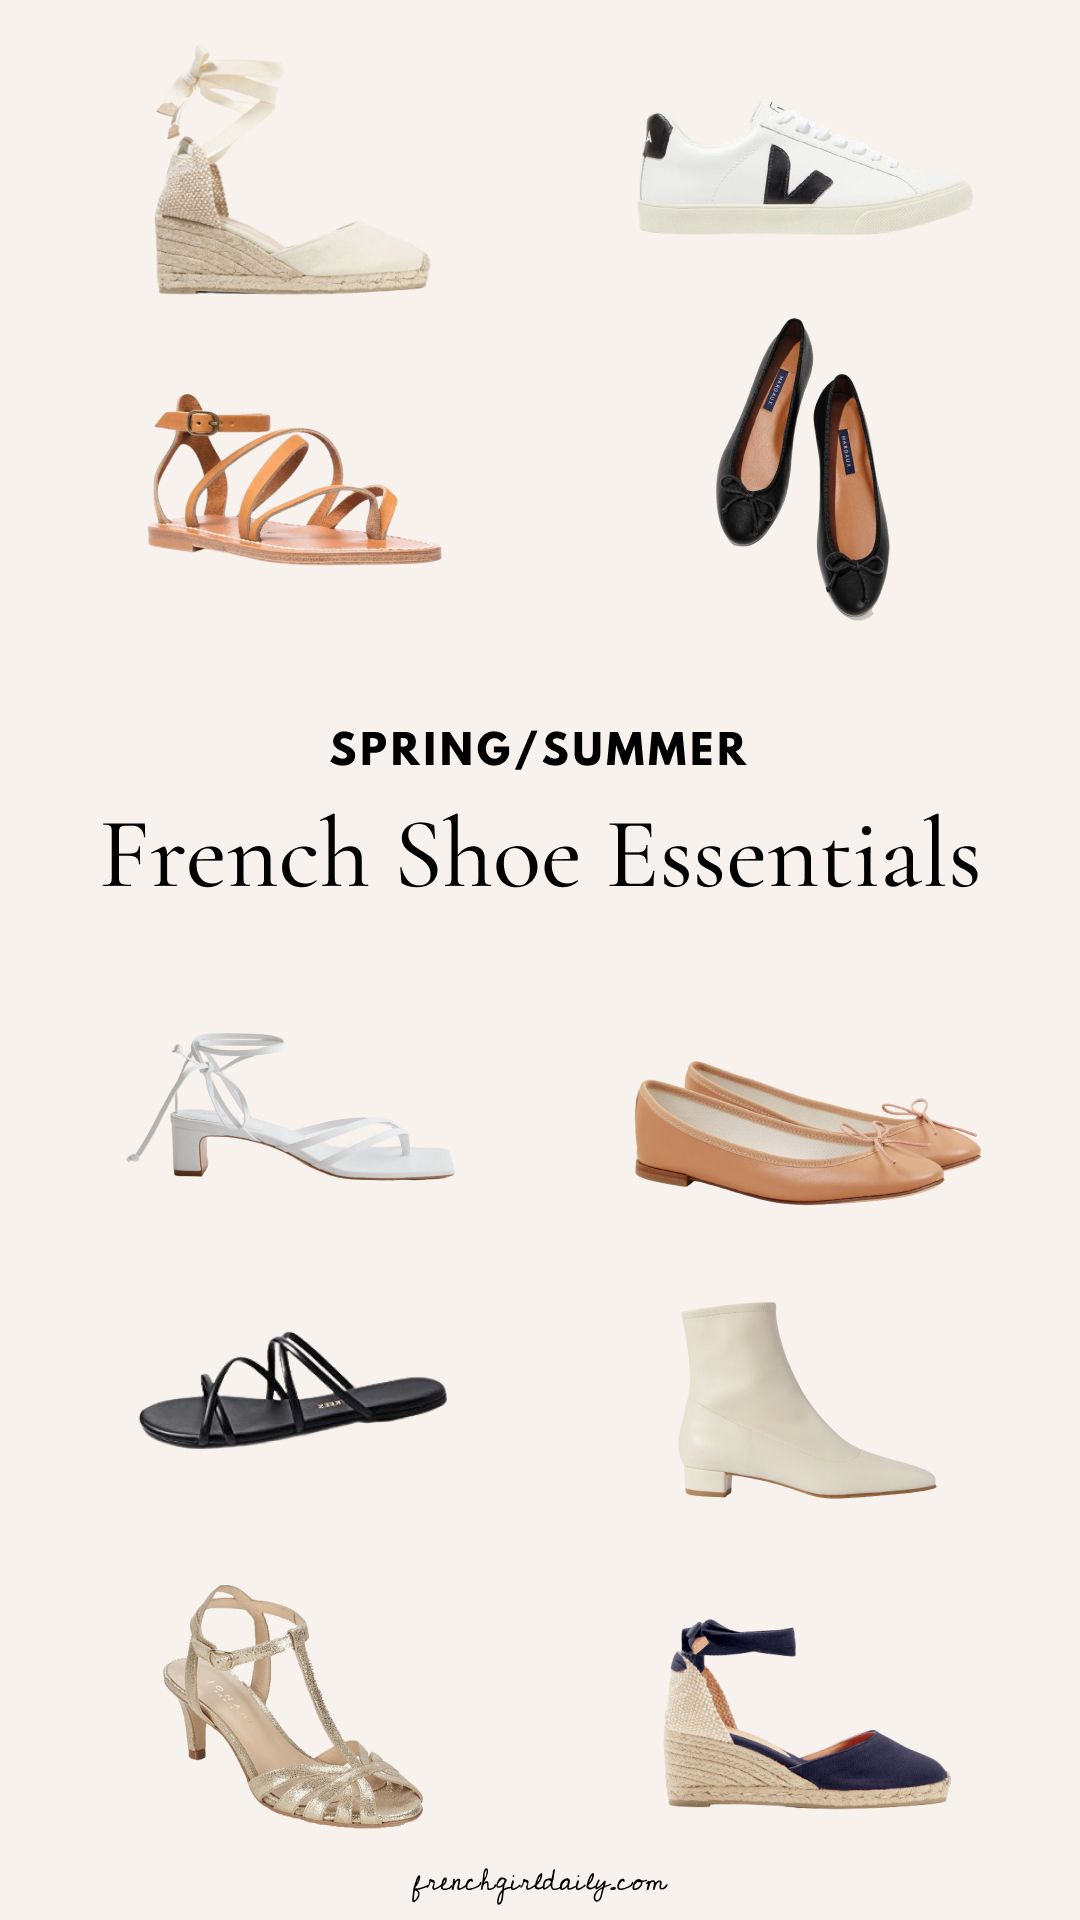 10 Best French Spring/Summer Shoes